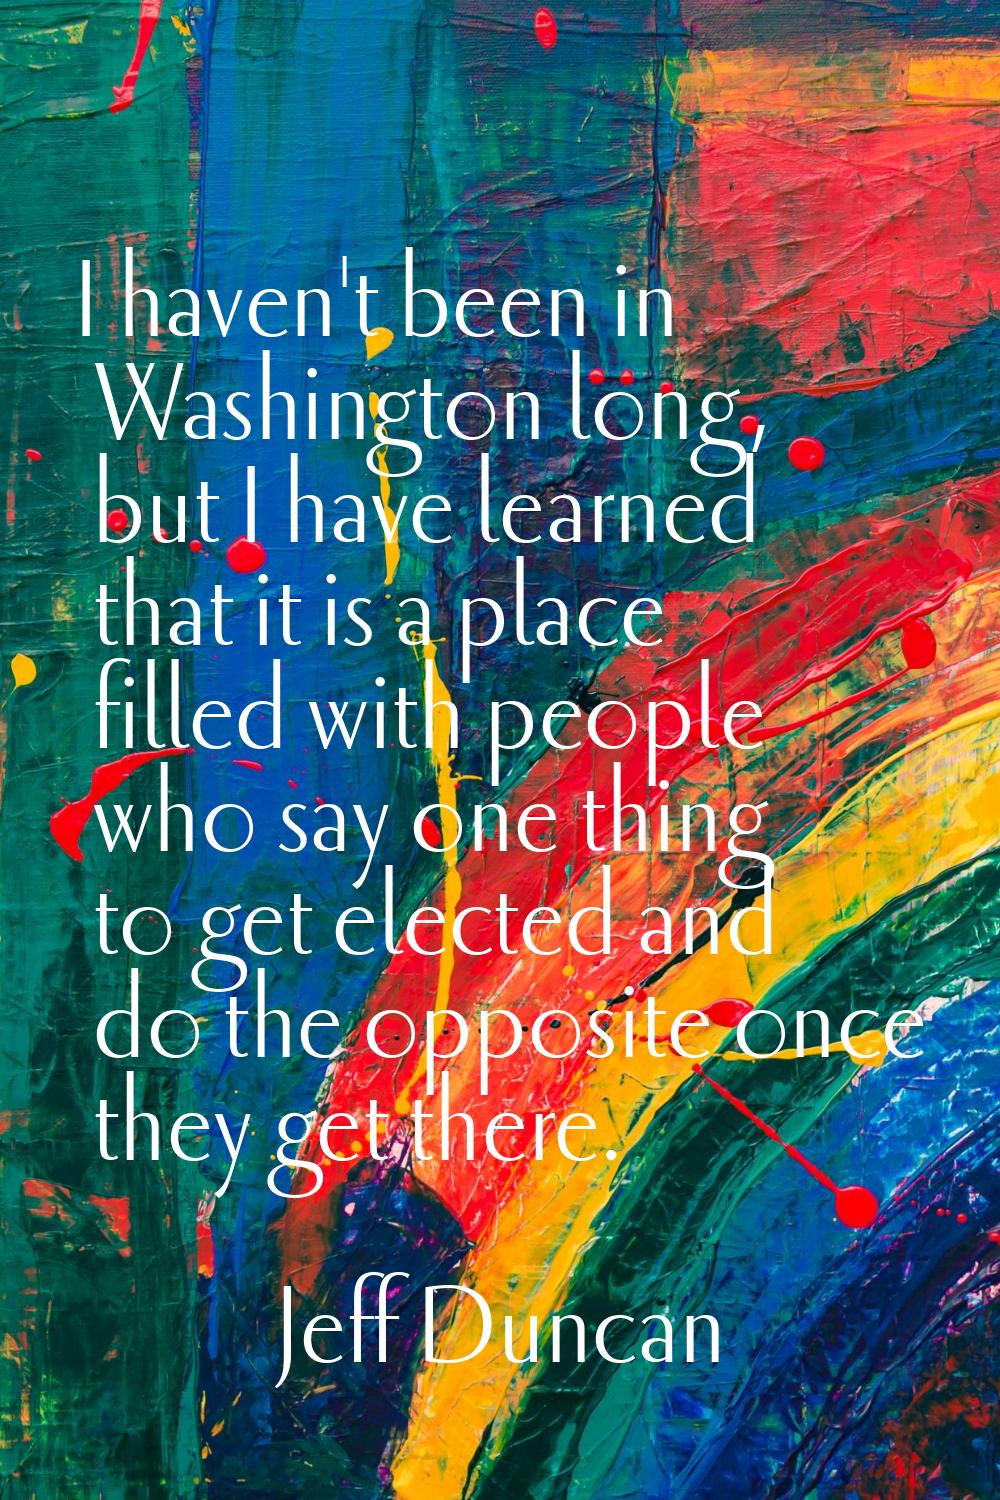 I haven't been in Washington long, but I have learned that it is a place filled with people who say